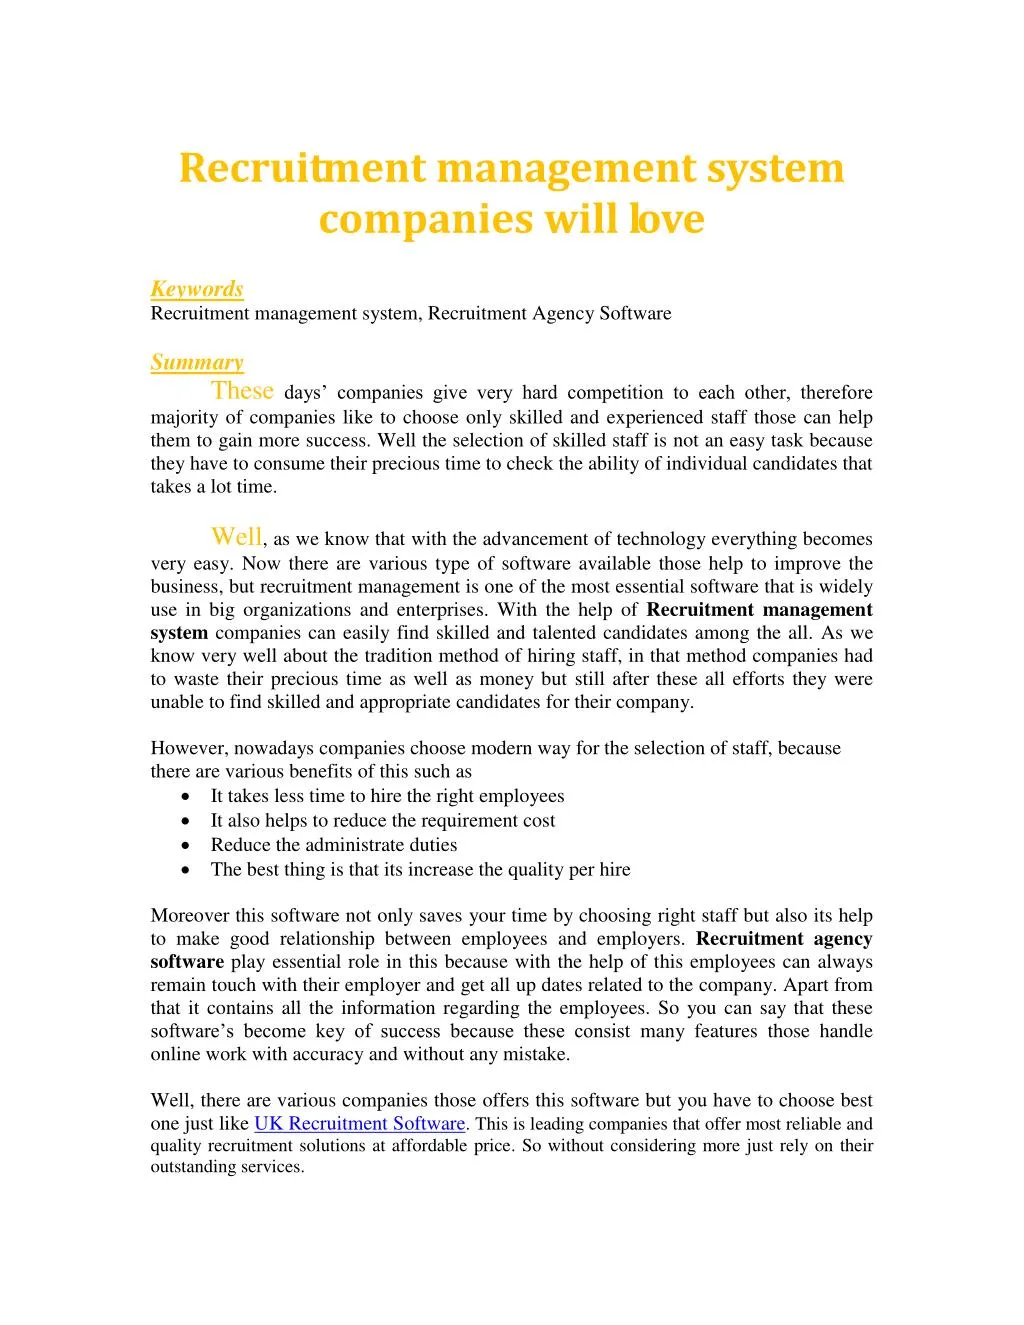 recruitment management system companies will love